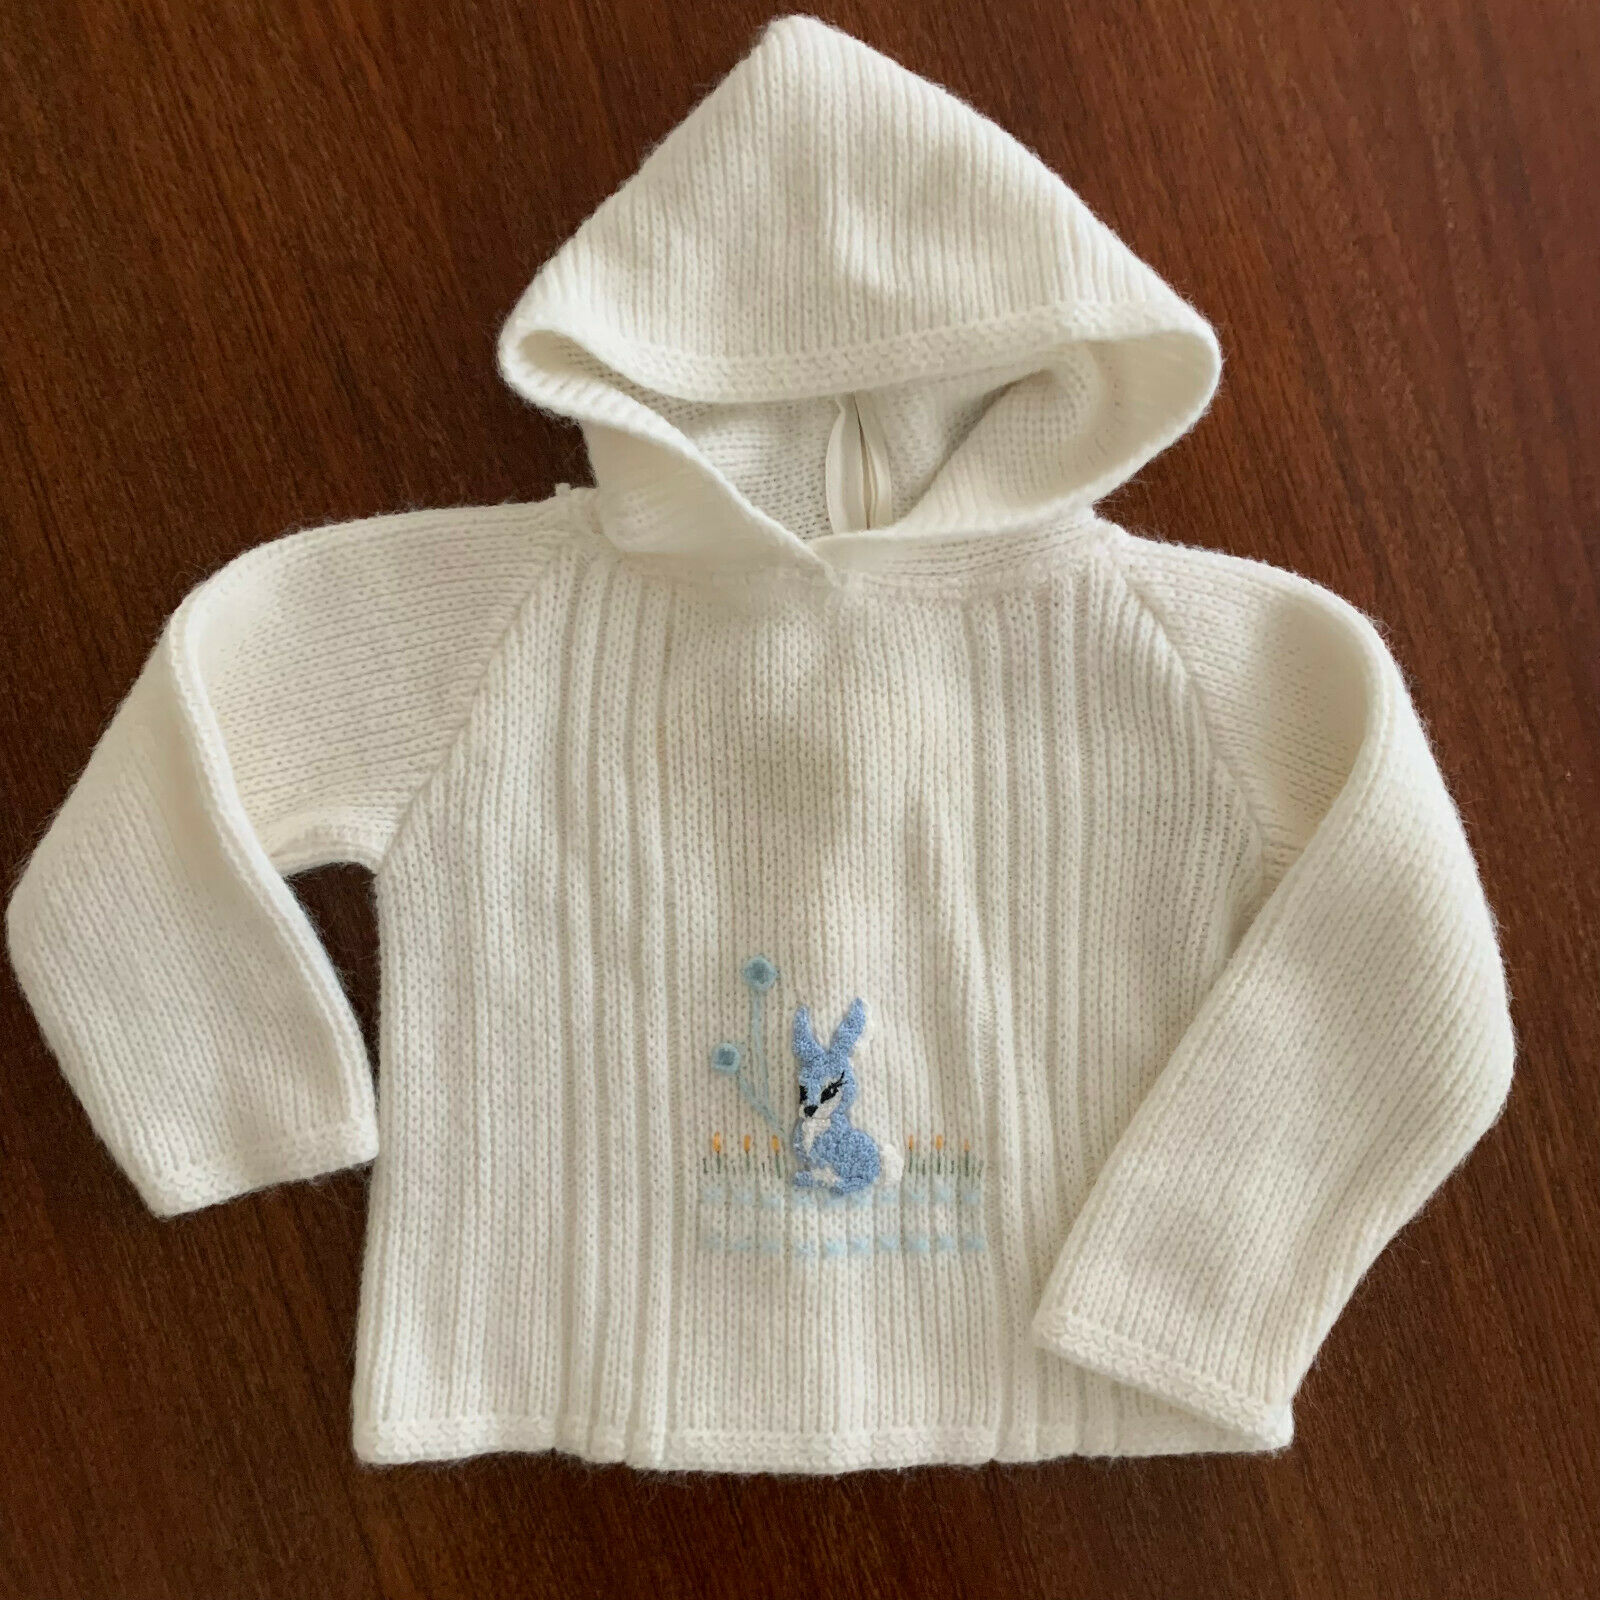 Vintage Baby Boys Girls Bunny Knit Sweater 6-12 Months